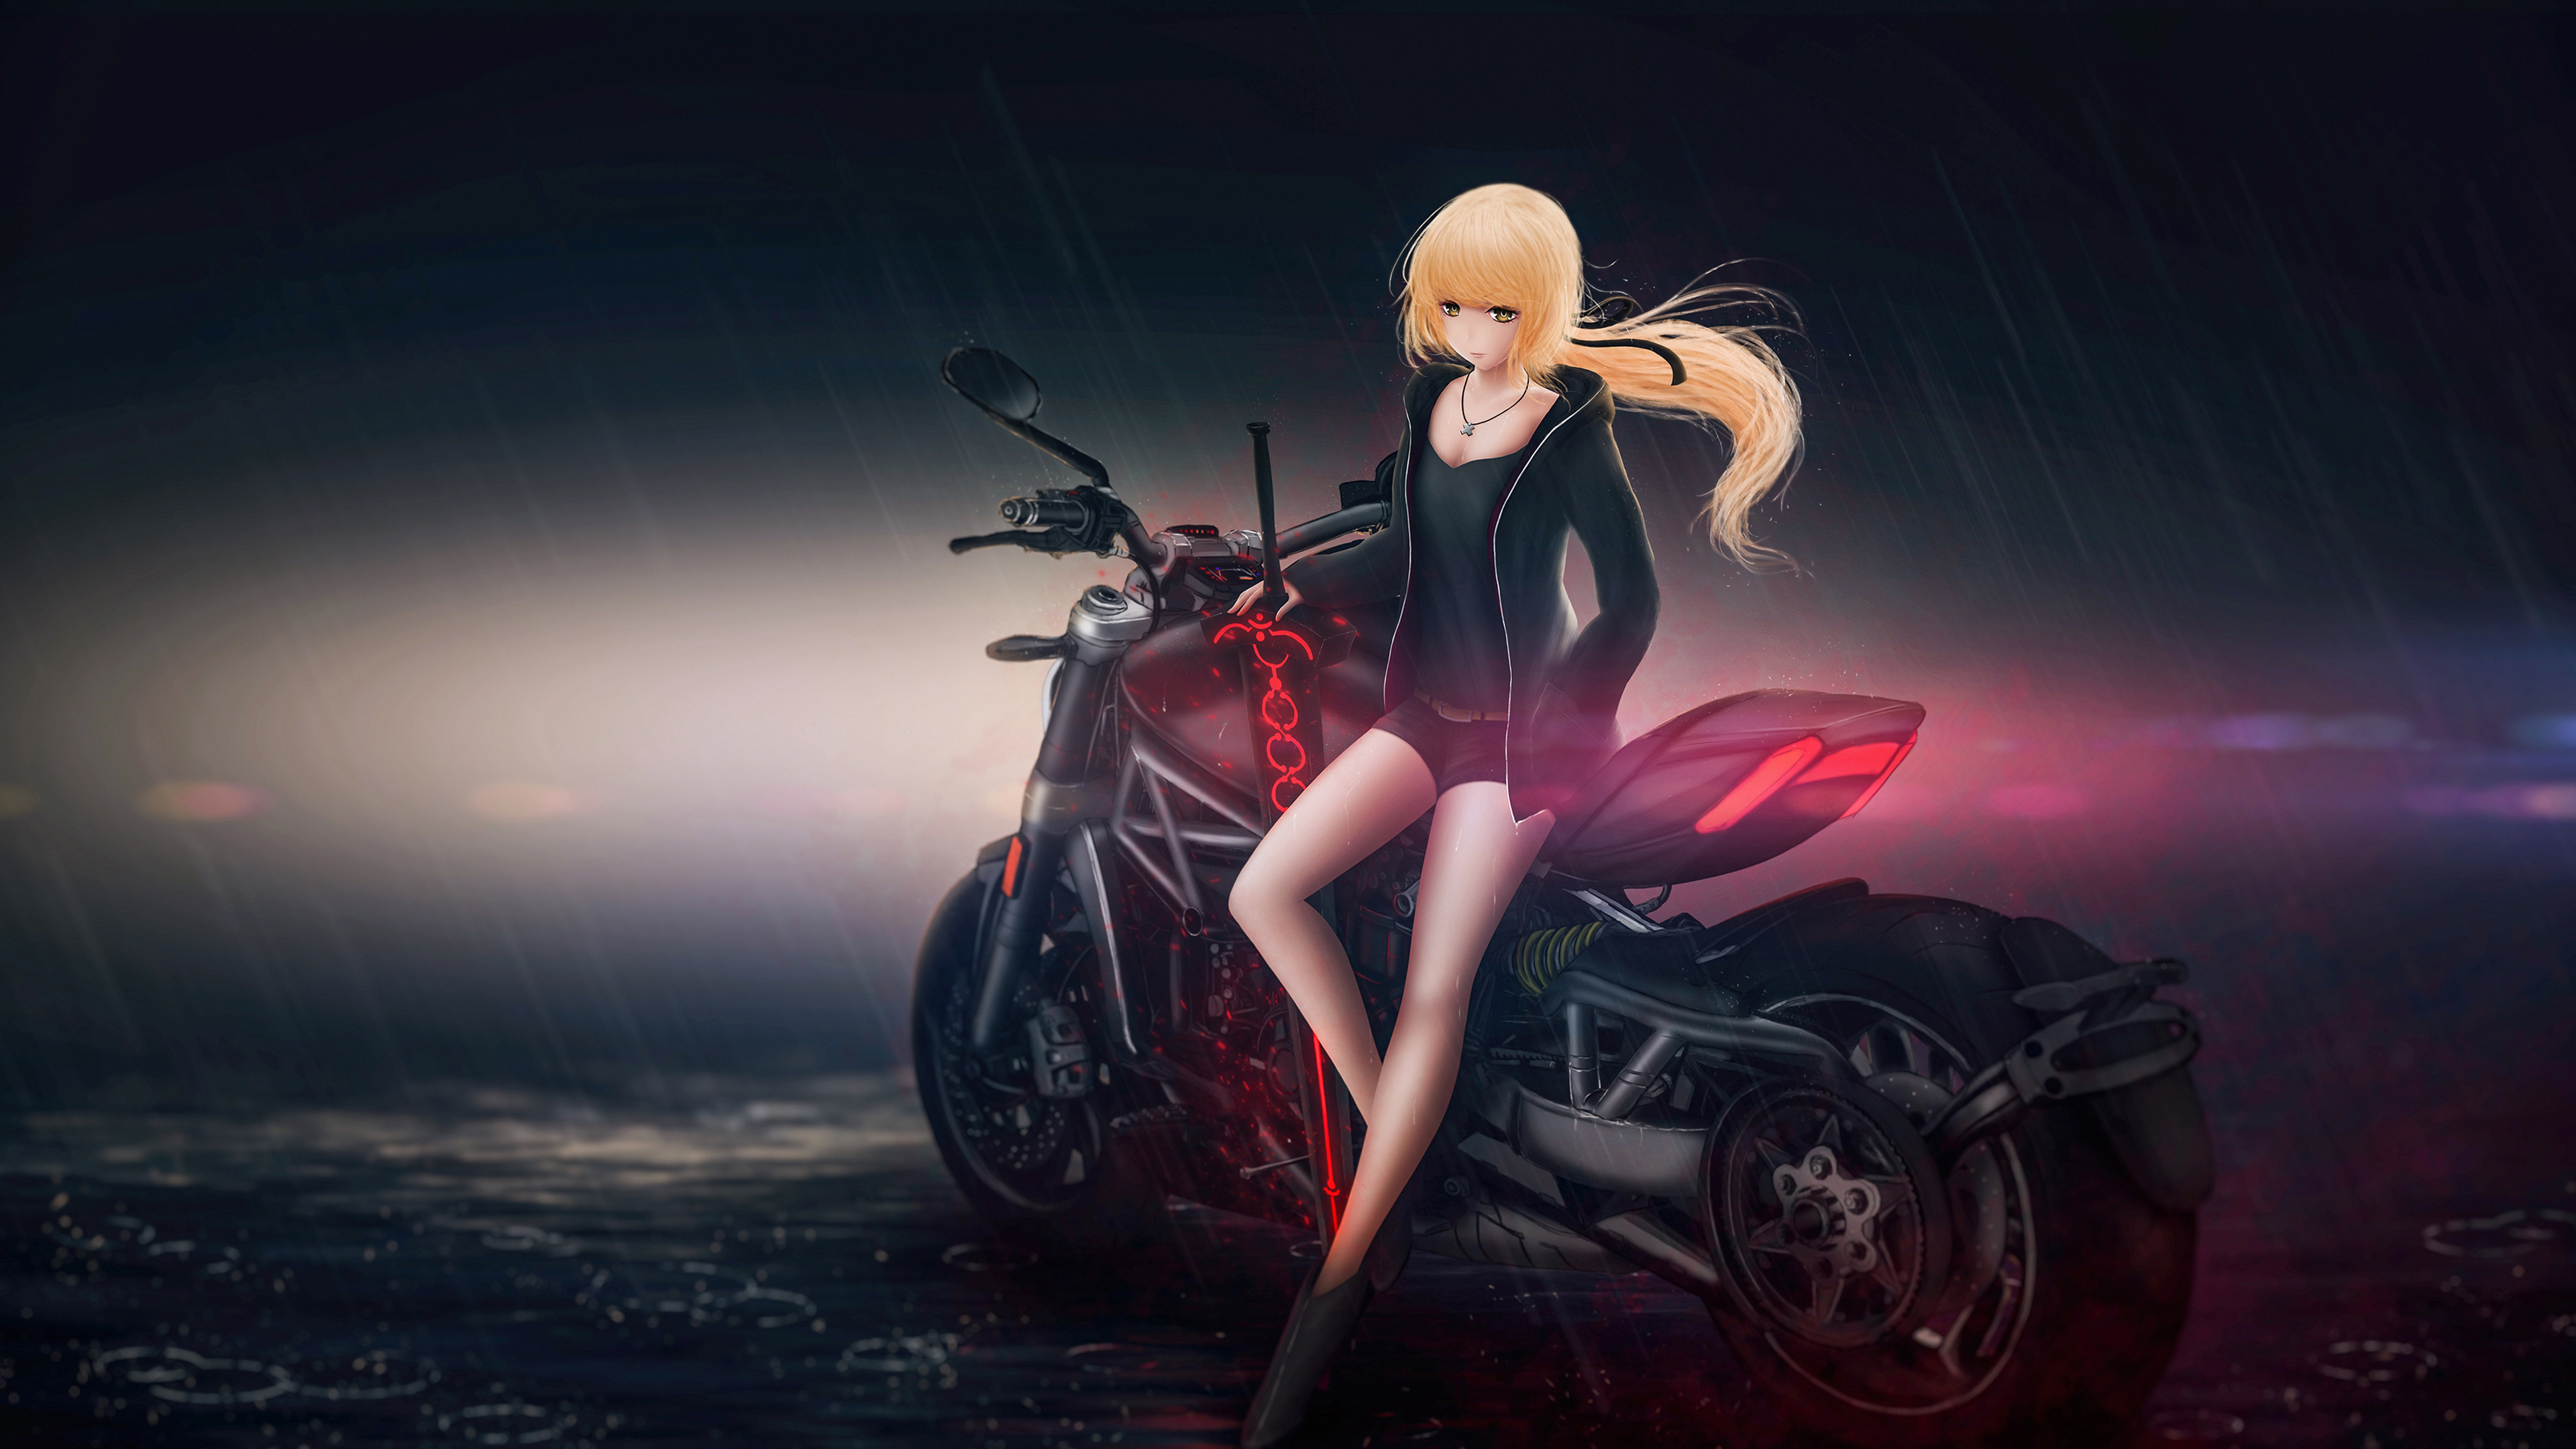 Woman in Black and Red Sports Bike Anime Character. Wallpaper in 3840x2160 Resolution